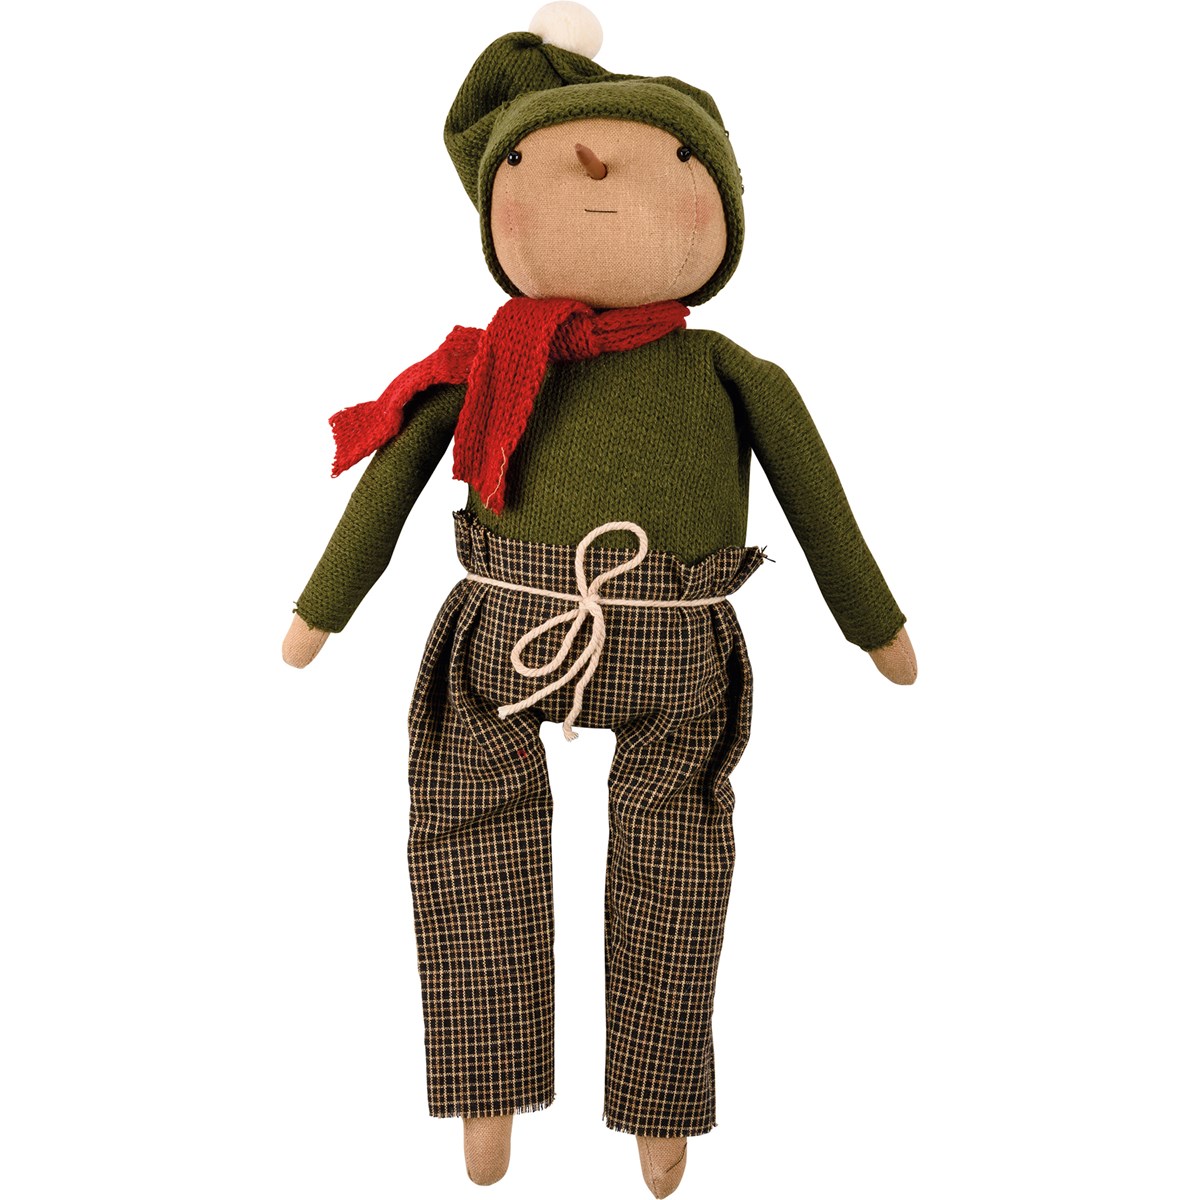 Frank Doll - Cotton, Wood, Wire, Plastic